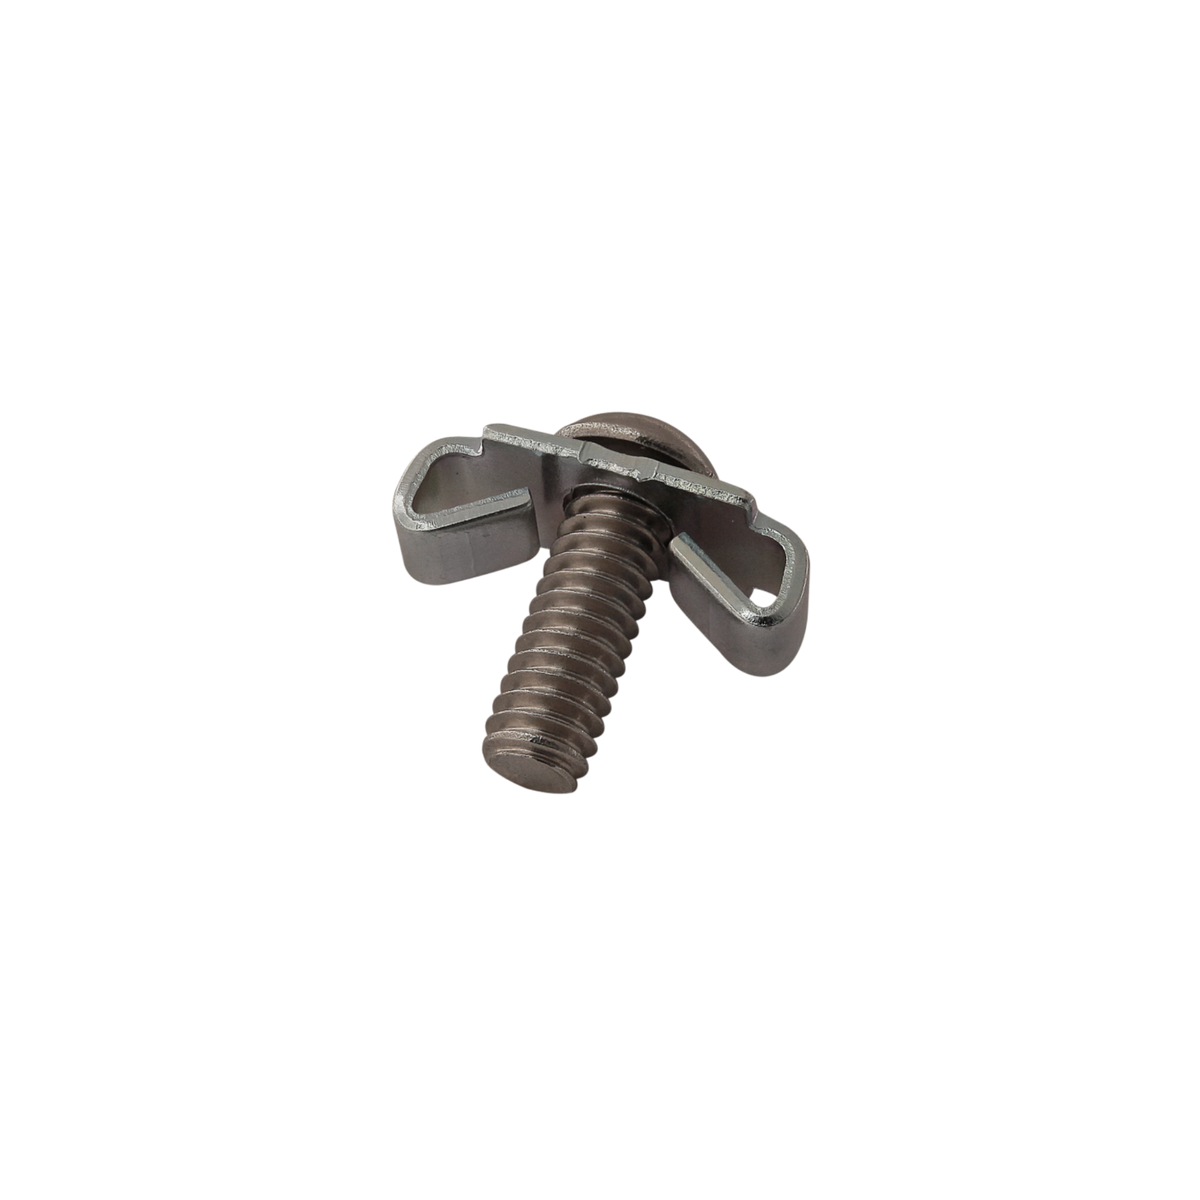 button head screw with the head toward the top and the threading part pointing downward, with a wing clip on the screw